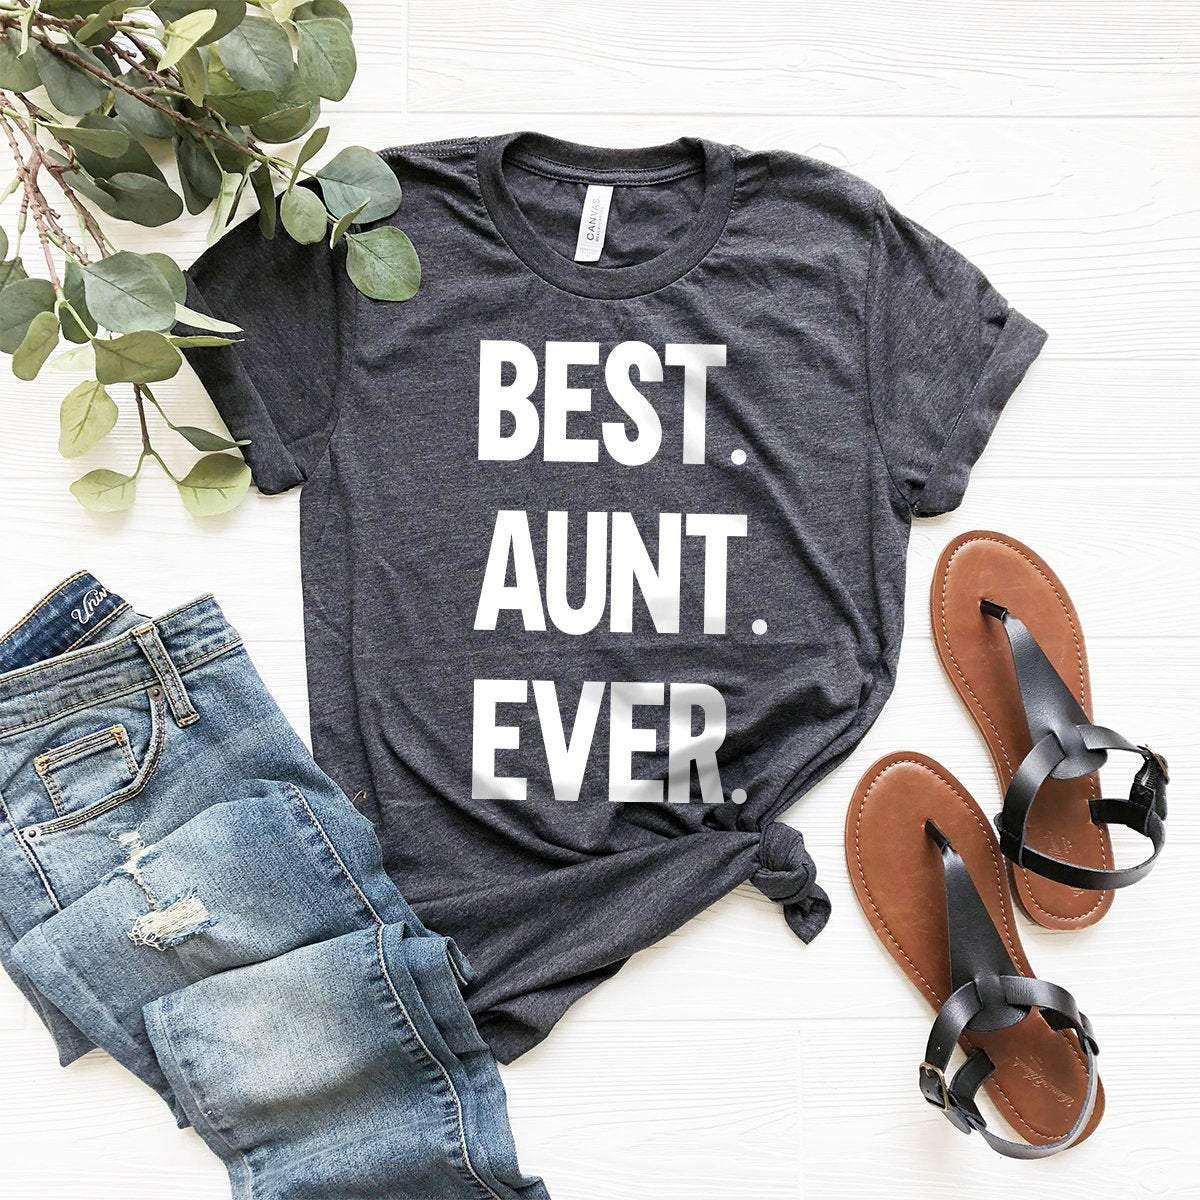 Best Aunt Ever T Shirt, Best Aunt Gift, World's Best  Aunt, Cool Aunt Shirt, New Aunt Shirt, Auntie Shirt, Shirt For Aunts, Aunt Graphic Tee - Fastdeliverytees.com